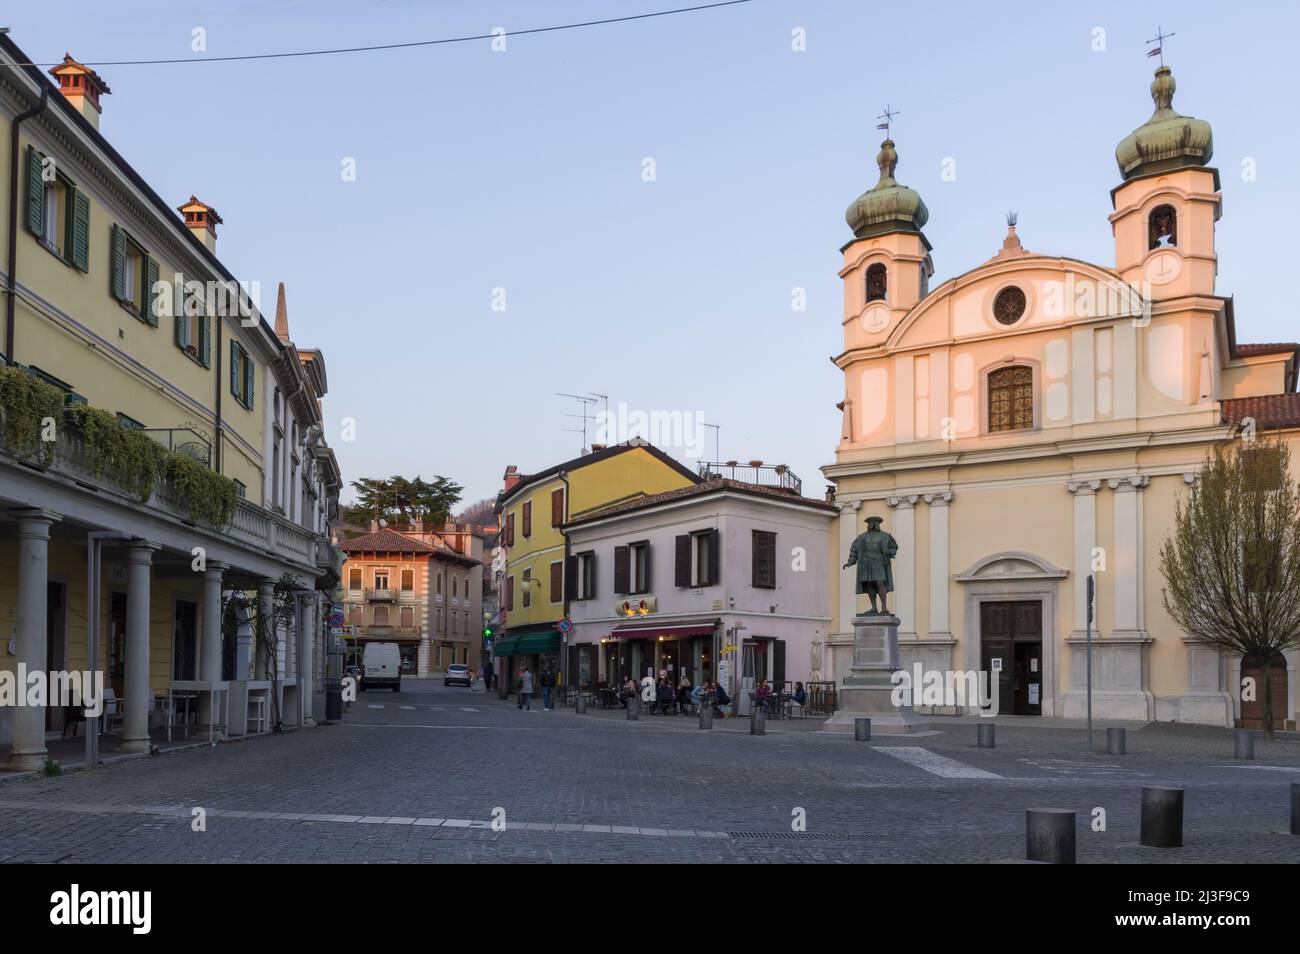 Cormons, Italy (27th March 2022) - The central Piazza Libertà square with the statue of Maximilian I of Habsburg and the church of Santa Caterina Stock Photo